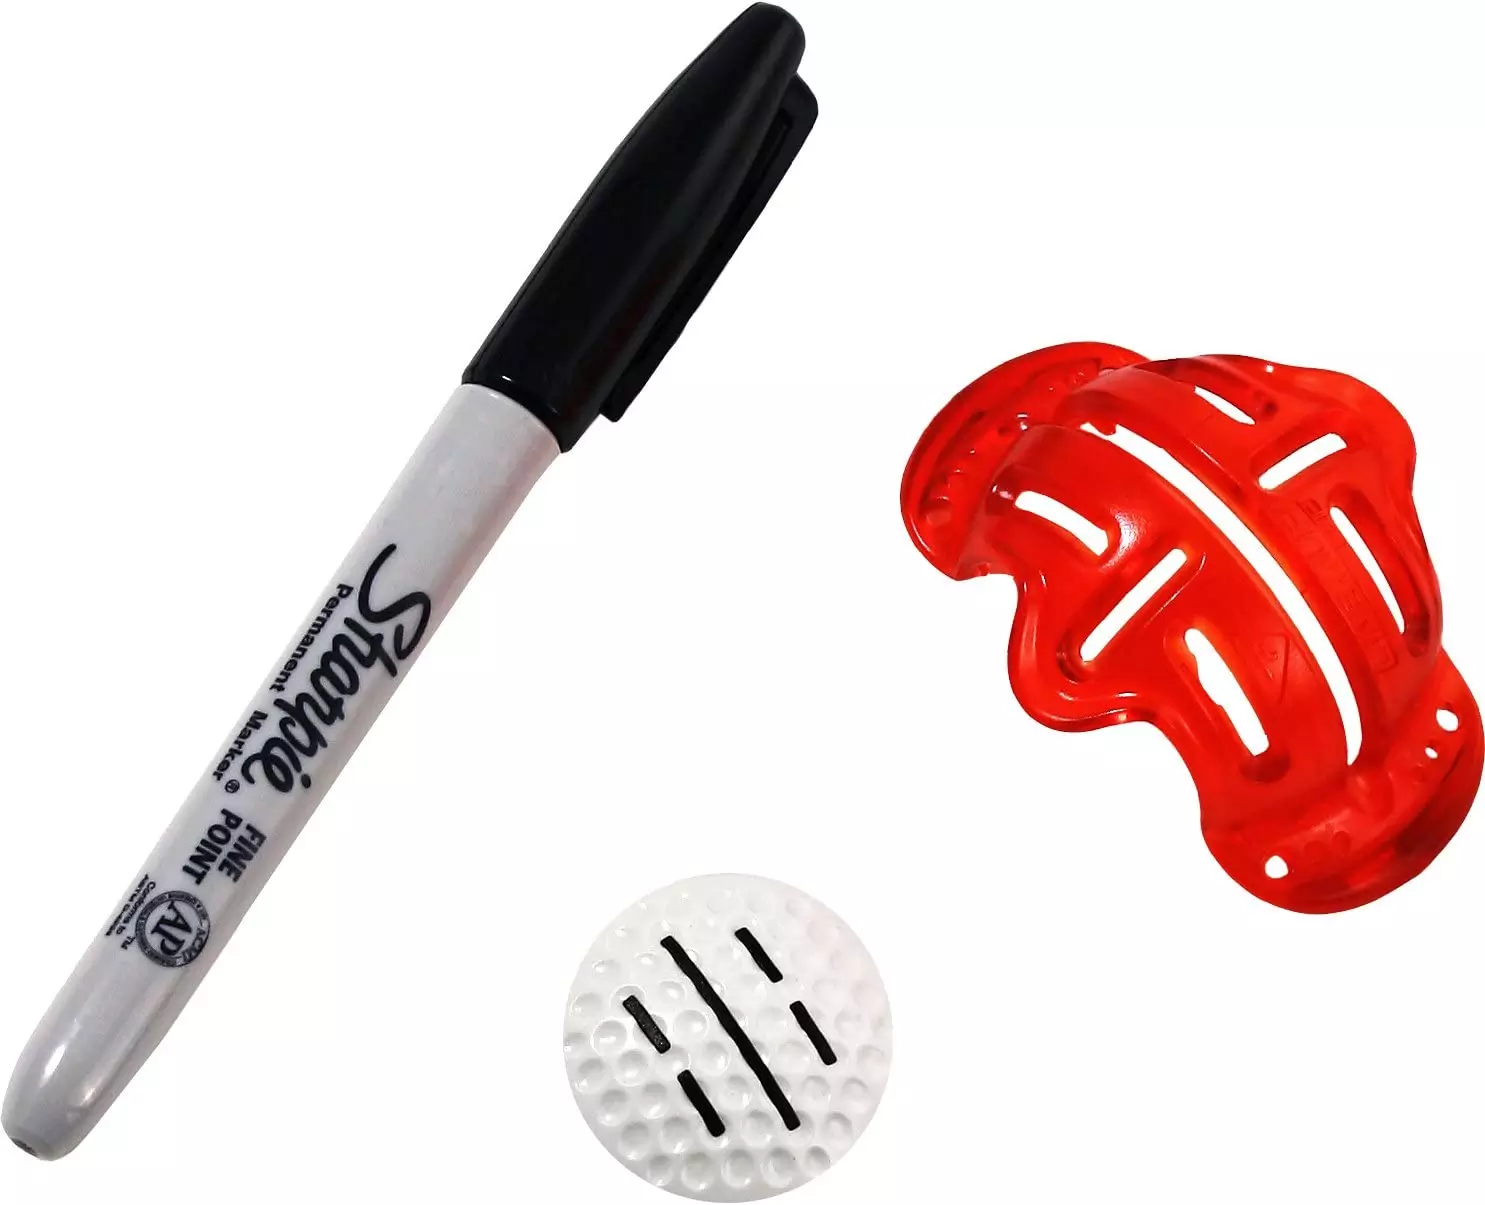 Greenkeepers Line M Up Golf Ball Markers is a black permanent marker that comes with a line up tool to draw straight lines on a golf ball